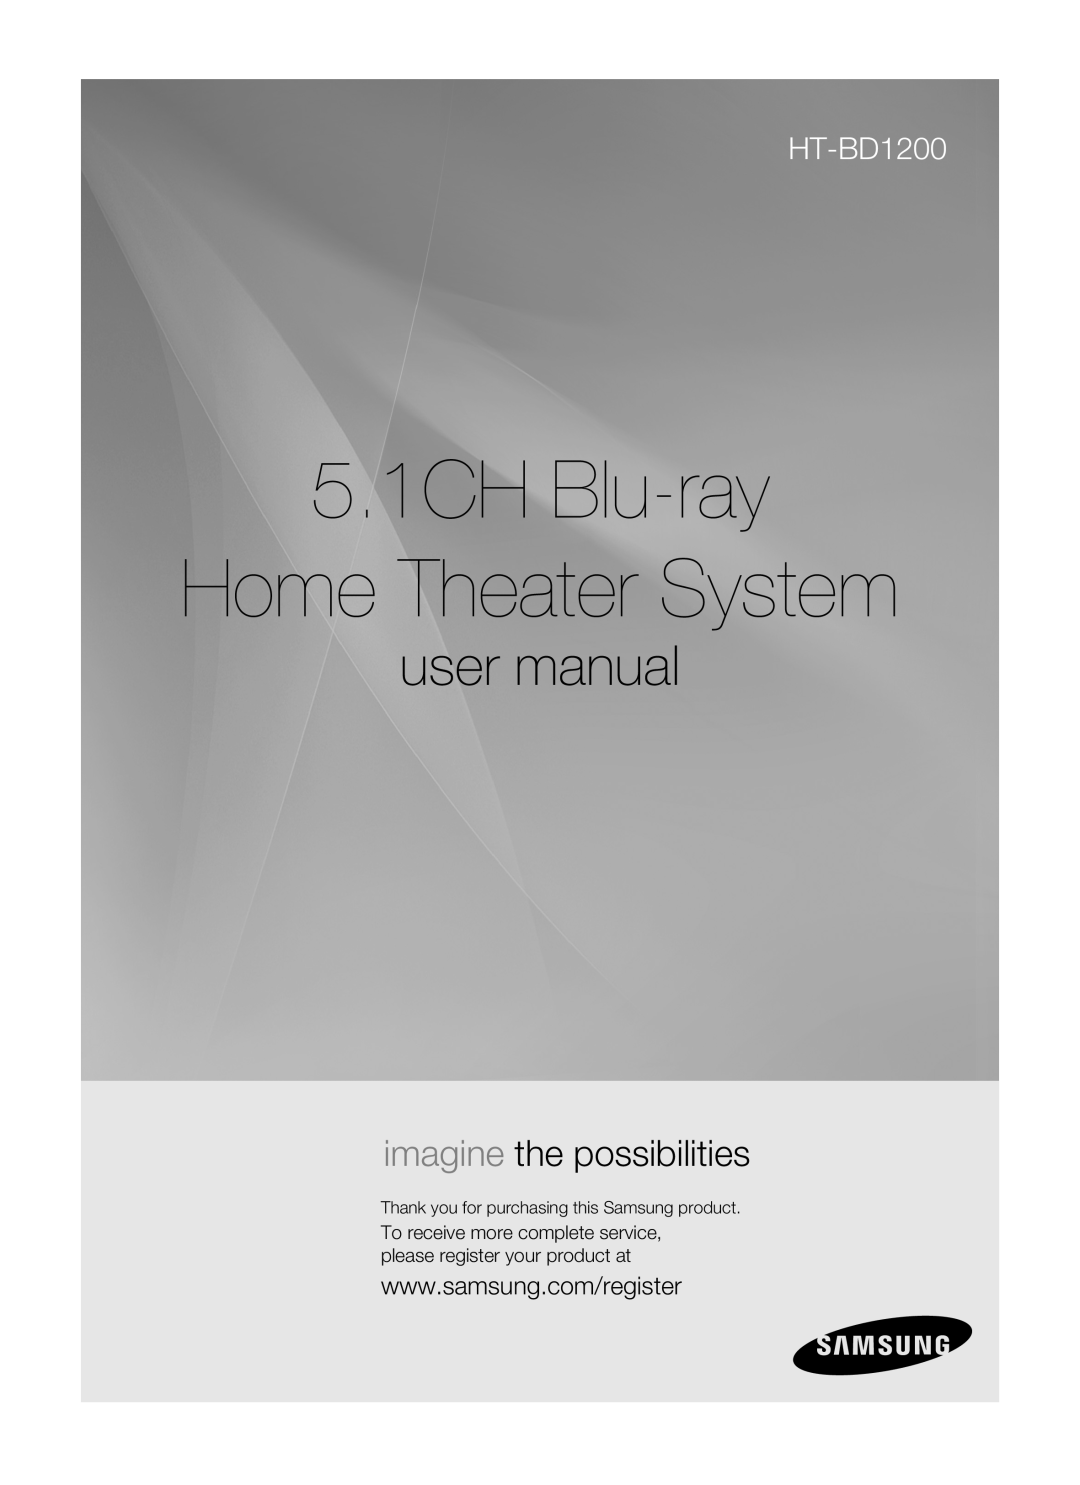 Samsung HT-BD1200, AH68-02178Z user manual 5.1CH Blu-ray Home Theater System, imagine the possibilities 